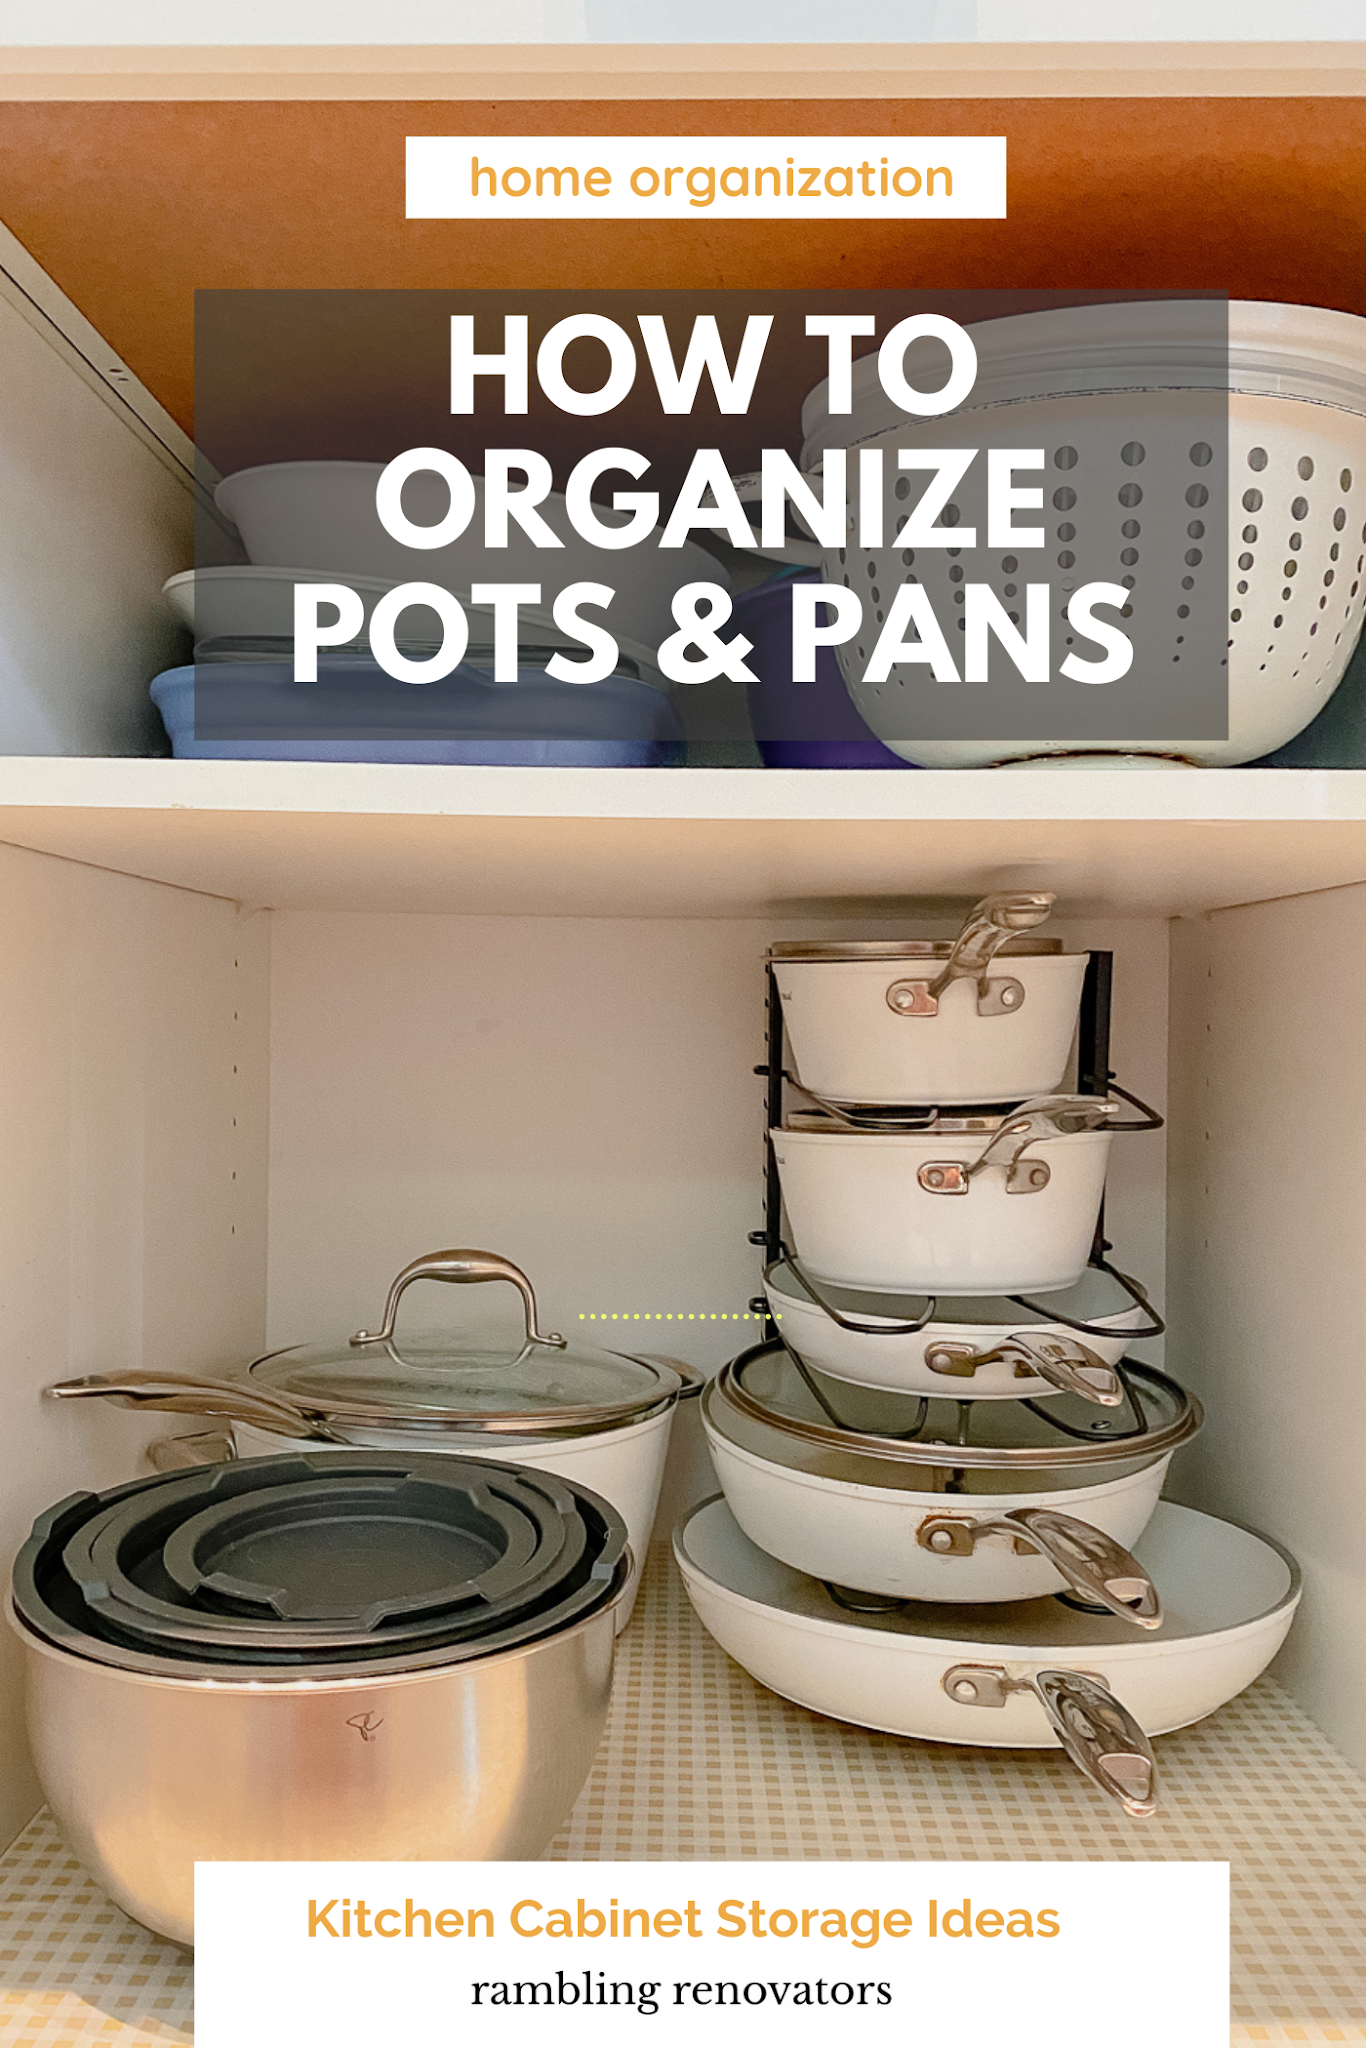 how to organize pots and pans, pots and pans storage ideas, organizing pots and pans